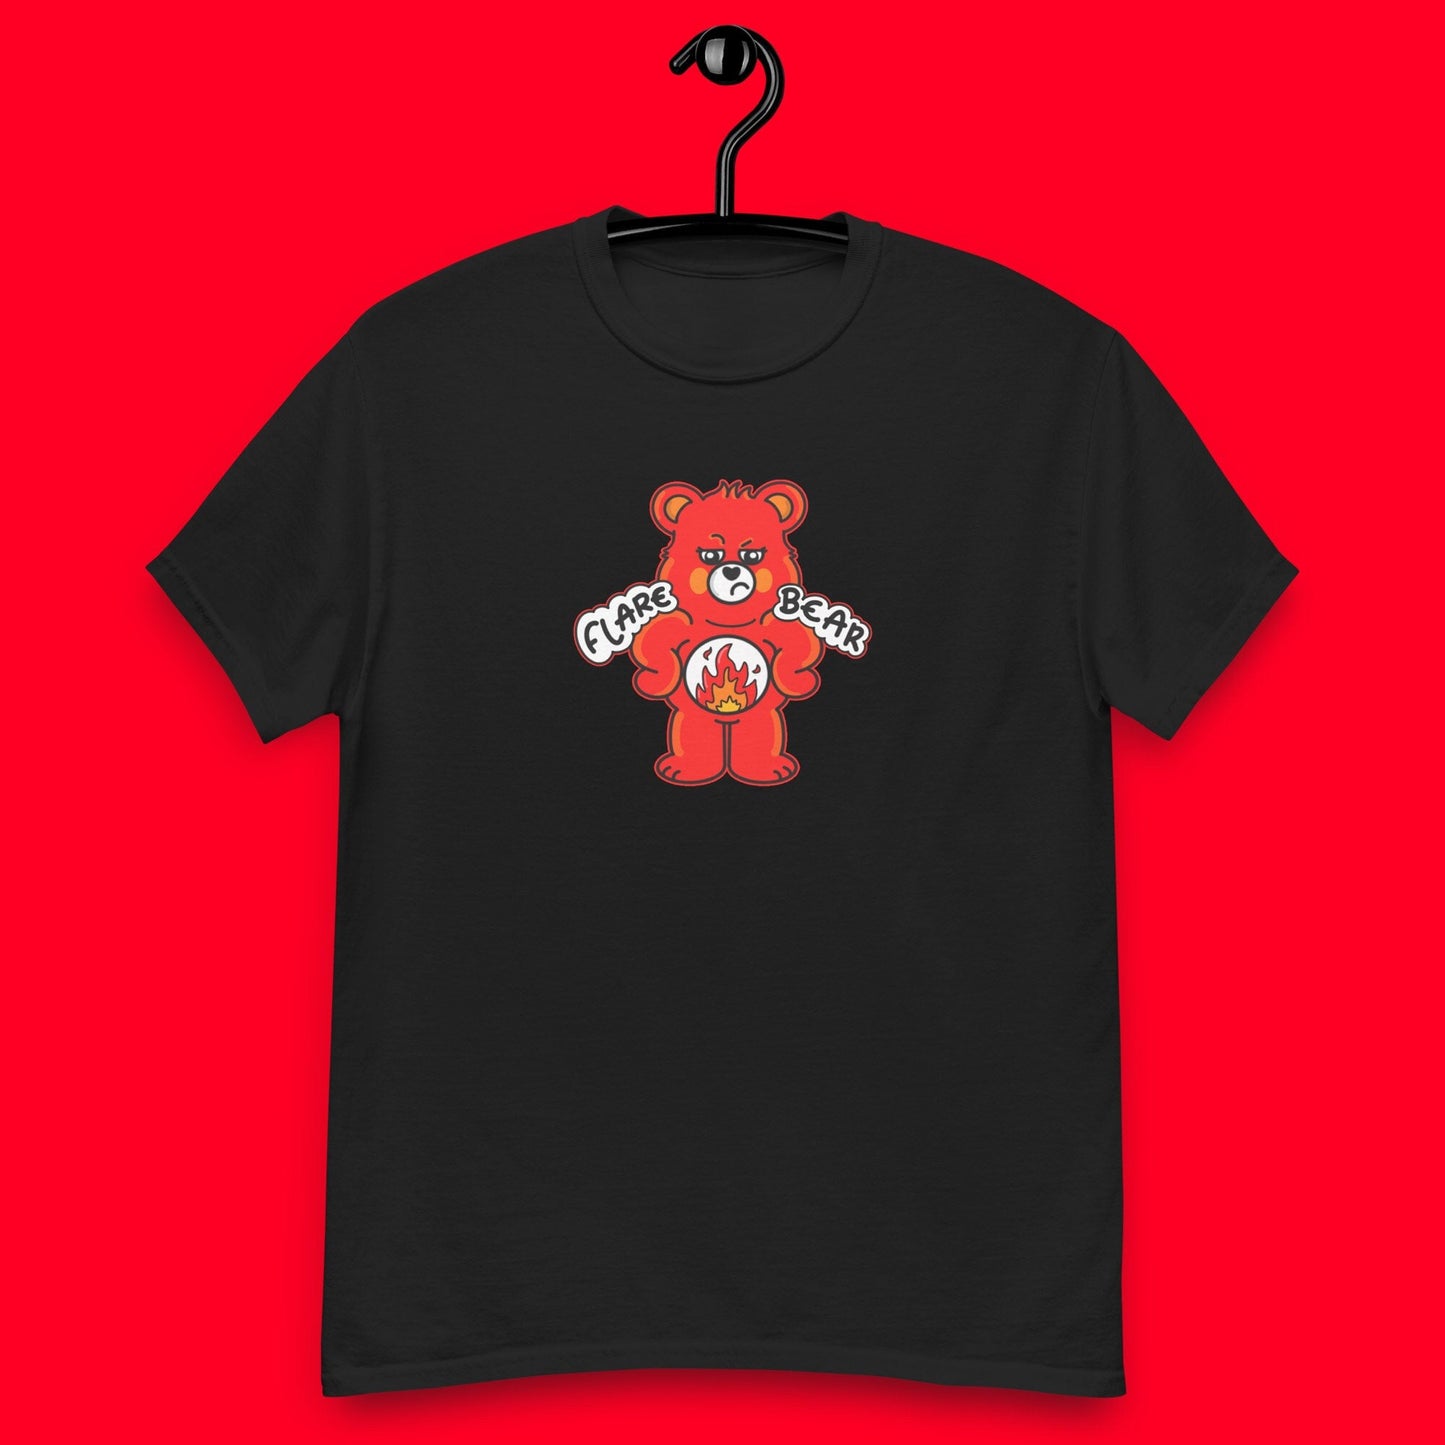 Flare Bear T-shirt hanging on a red background. The black short sleeve tshirt is of a red bear with a fed up expression and hands on its hips. There is a white circle on its belly with flames inside. Flare Bear is written on the middle. The tshirt is designed to raise awareness for chronic illness flare ups.